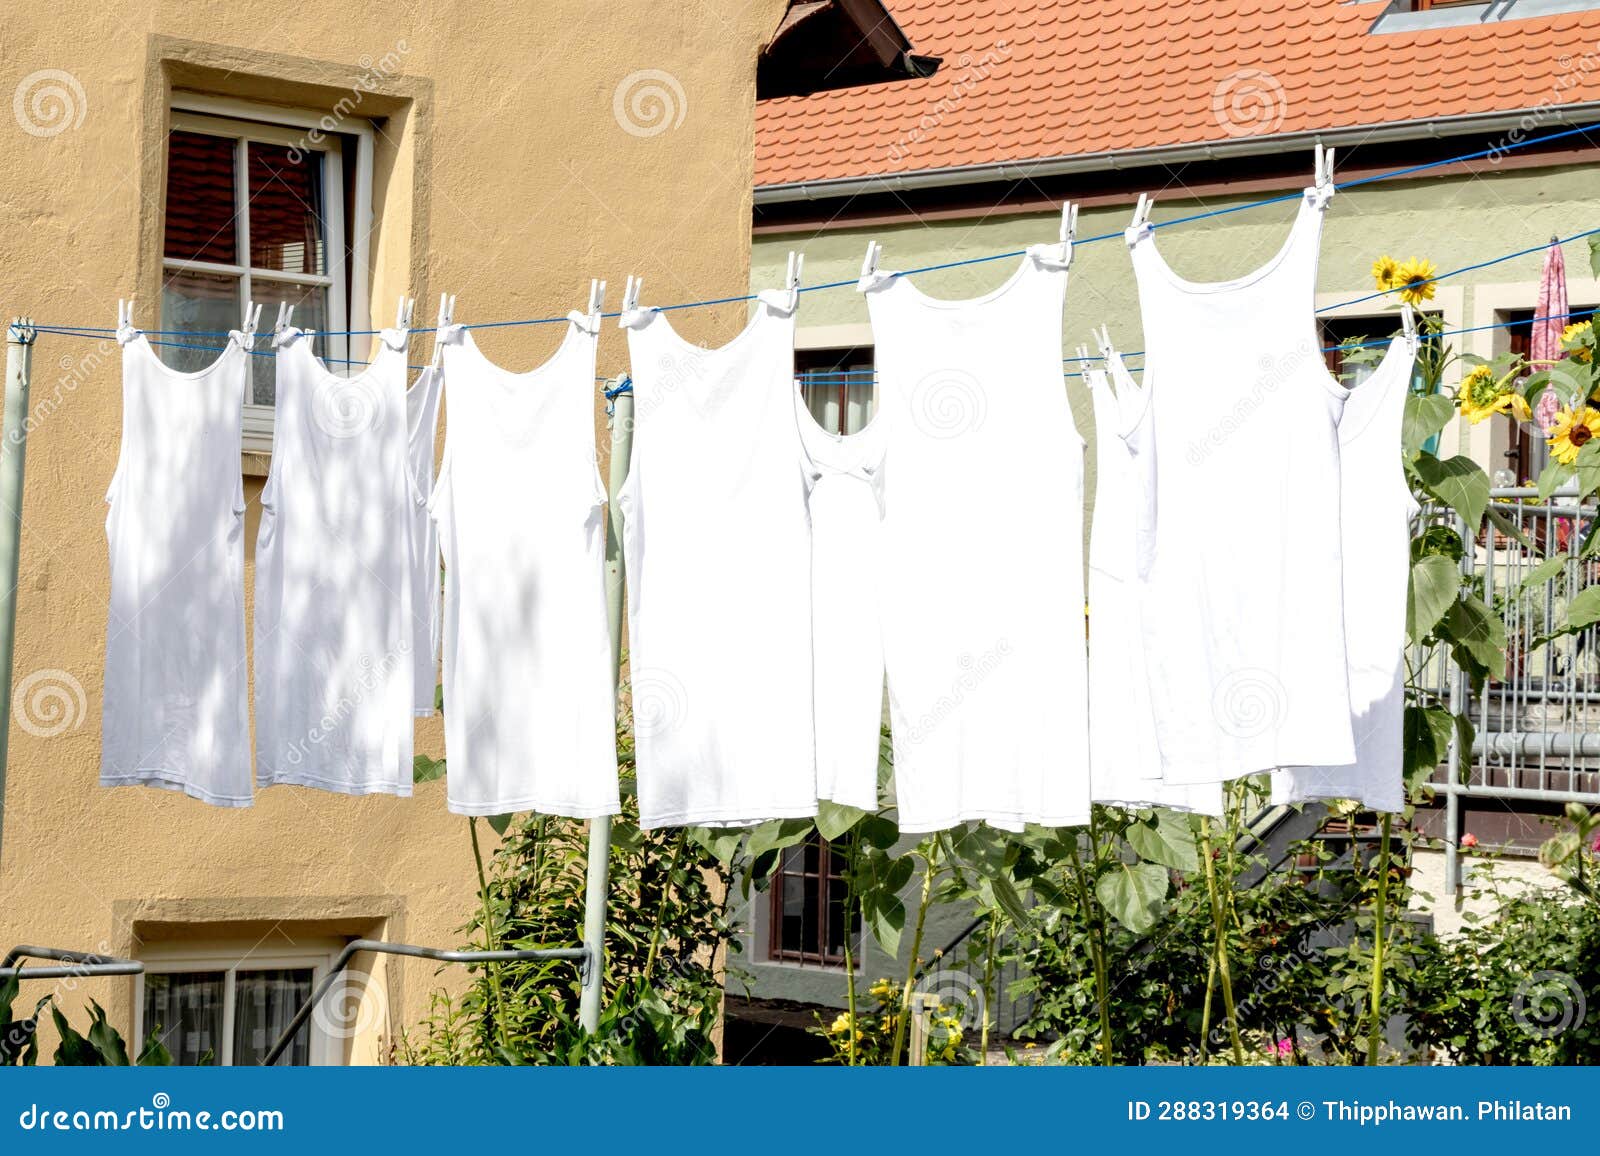 Undershirts Man Hanging Outside a House for Drying. Stock Photo - Image ...